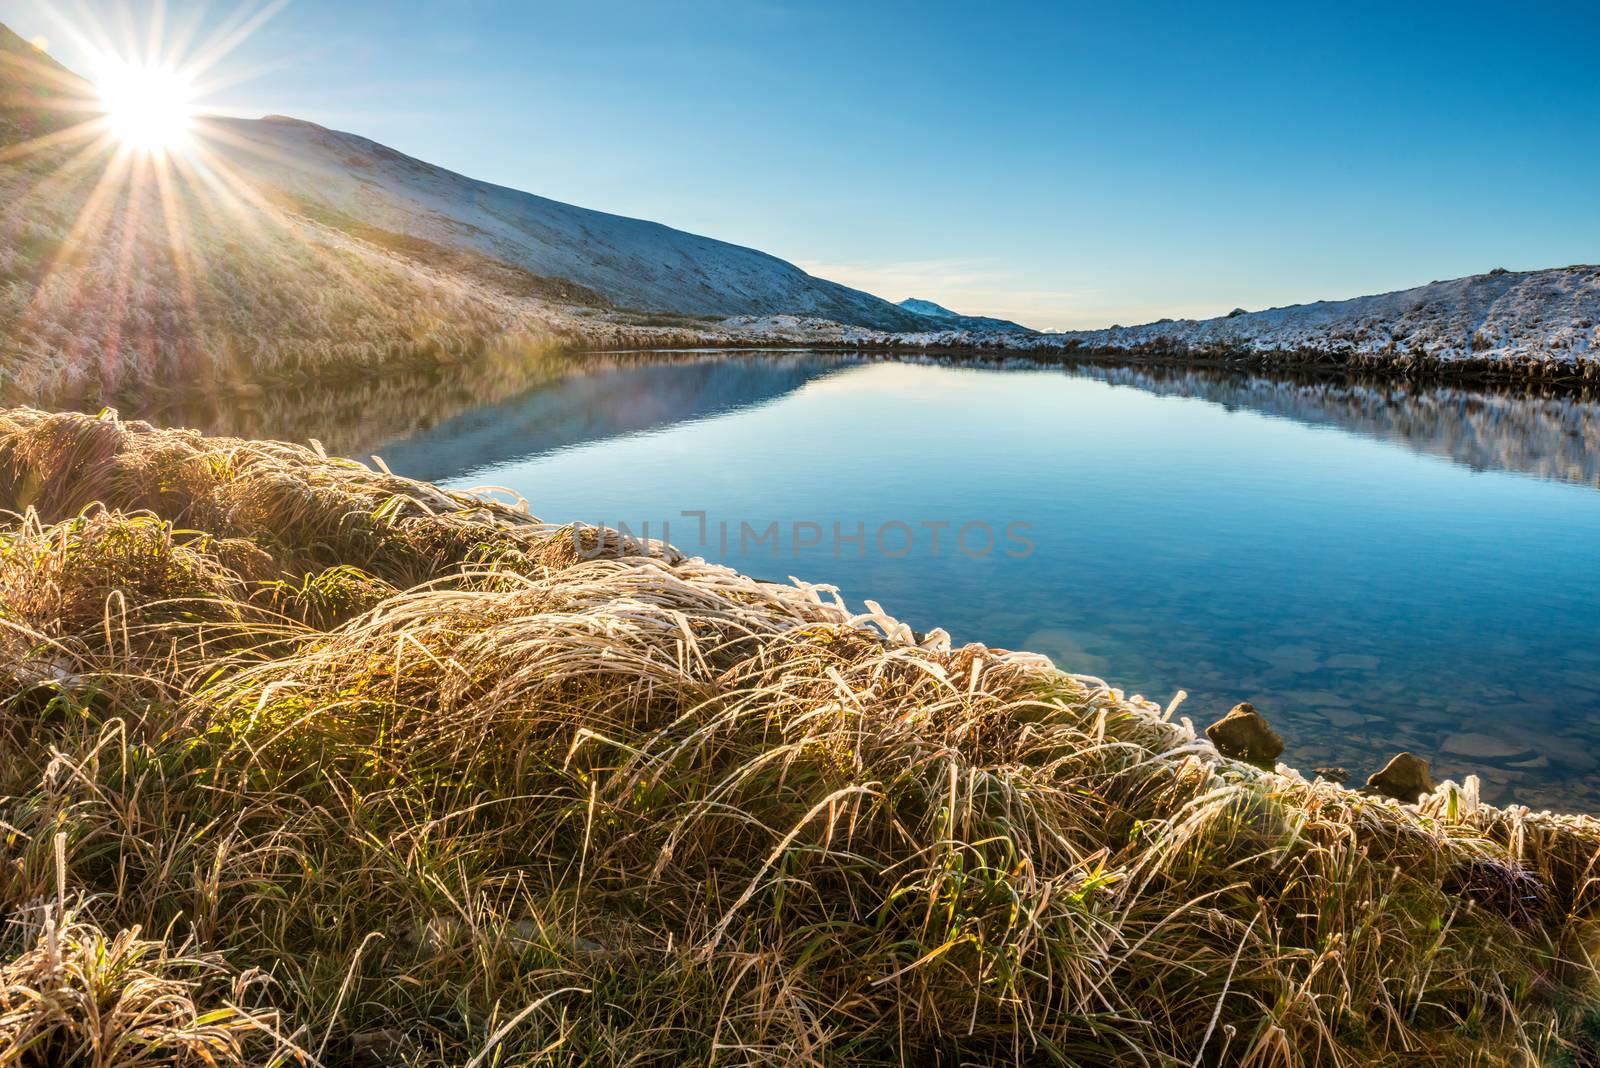 Mountain lake with blue water and sunset over it. Shining sun above the bank